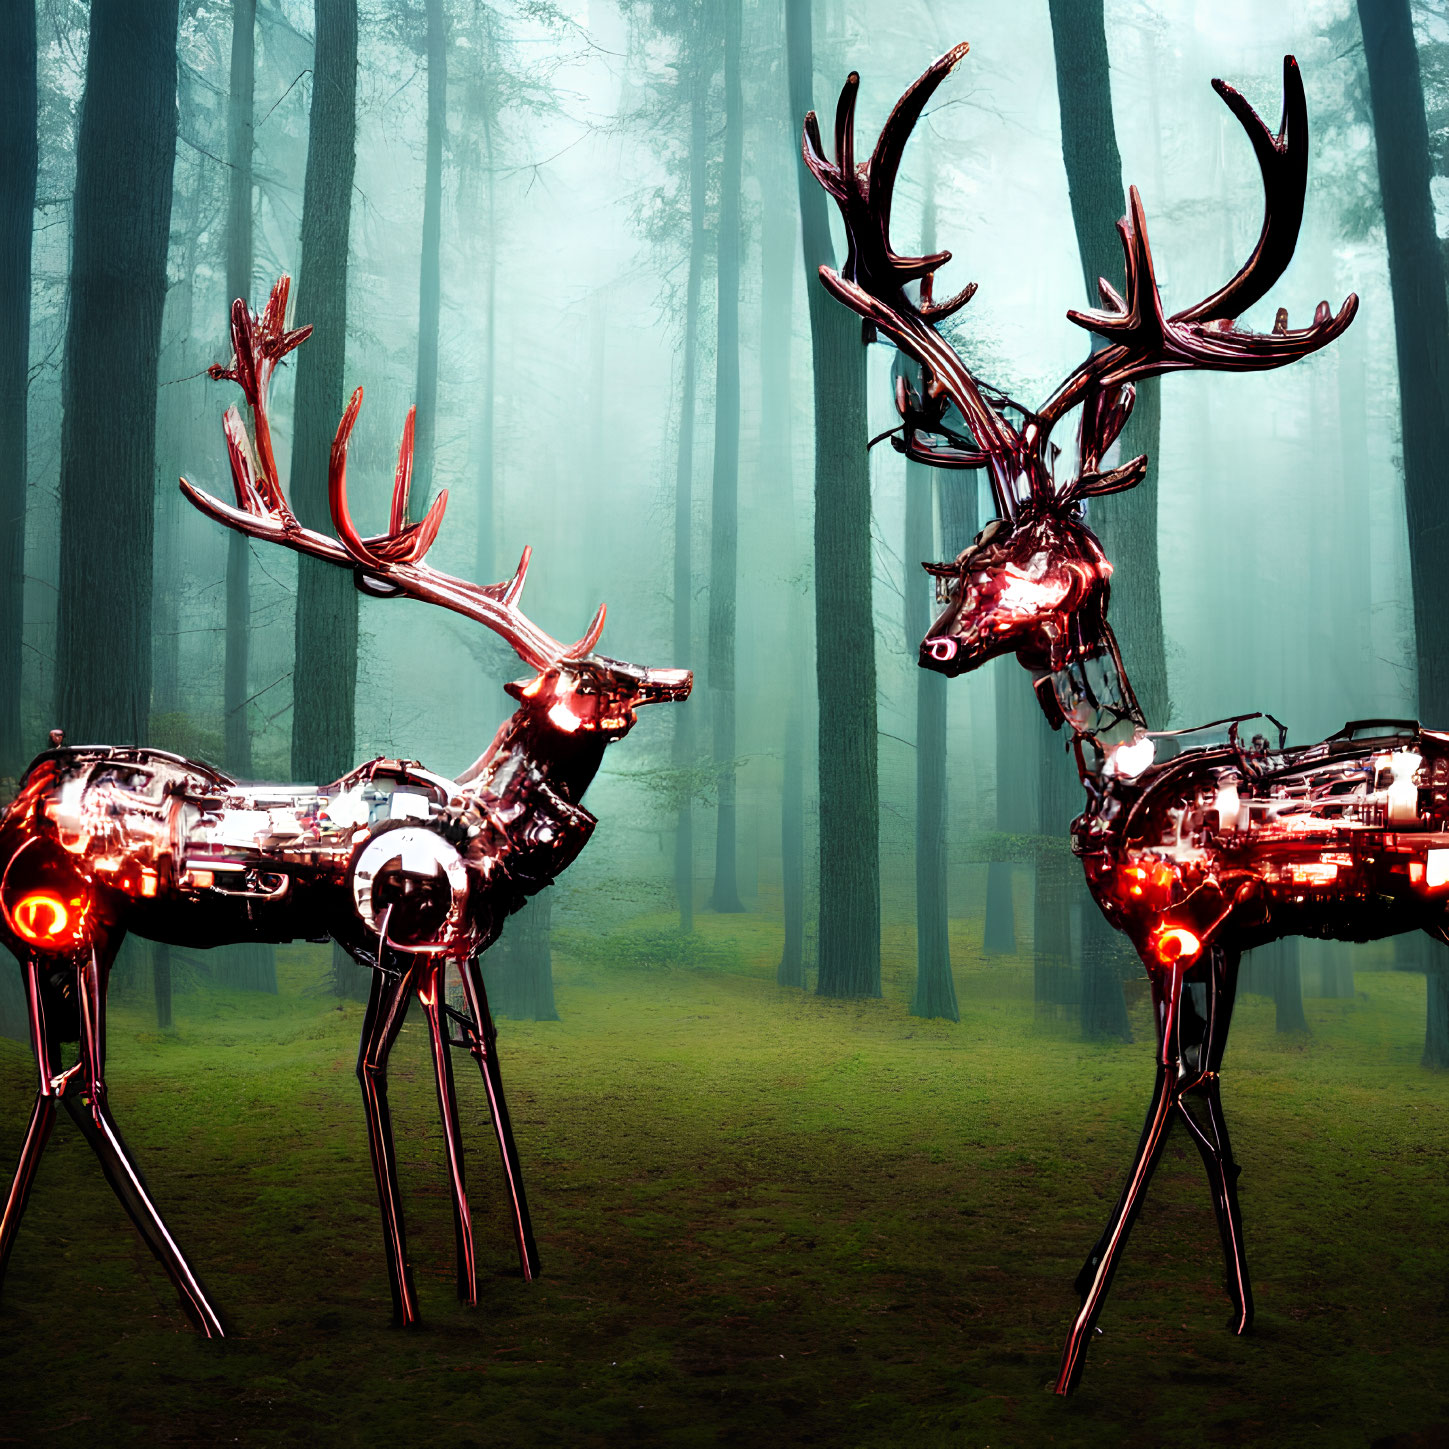 Mechanical deer with glowing red eyes in misty forest